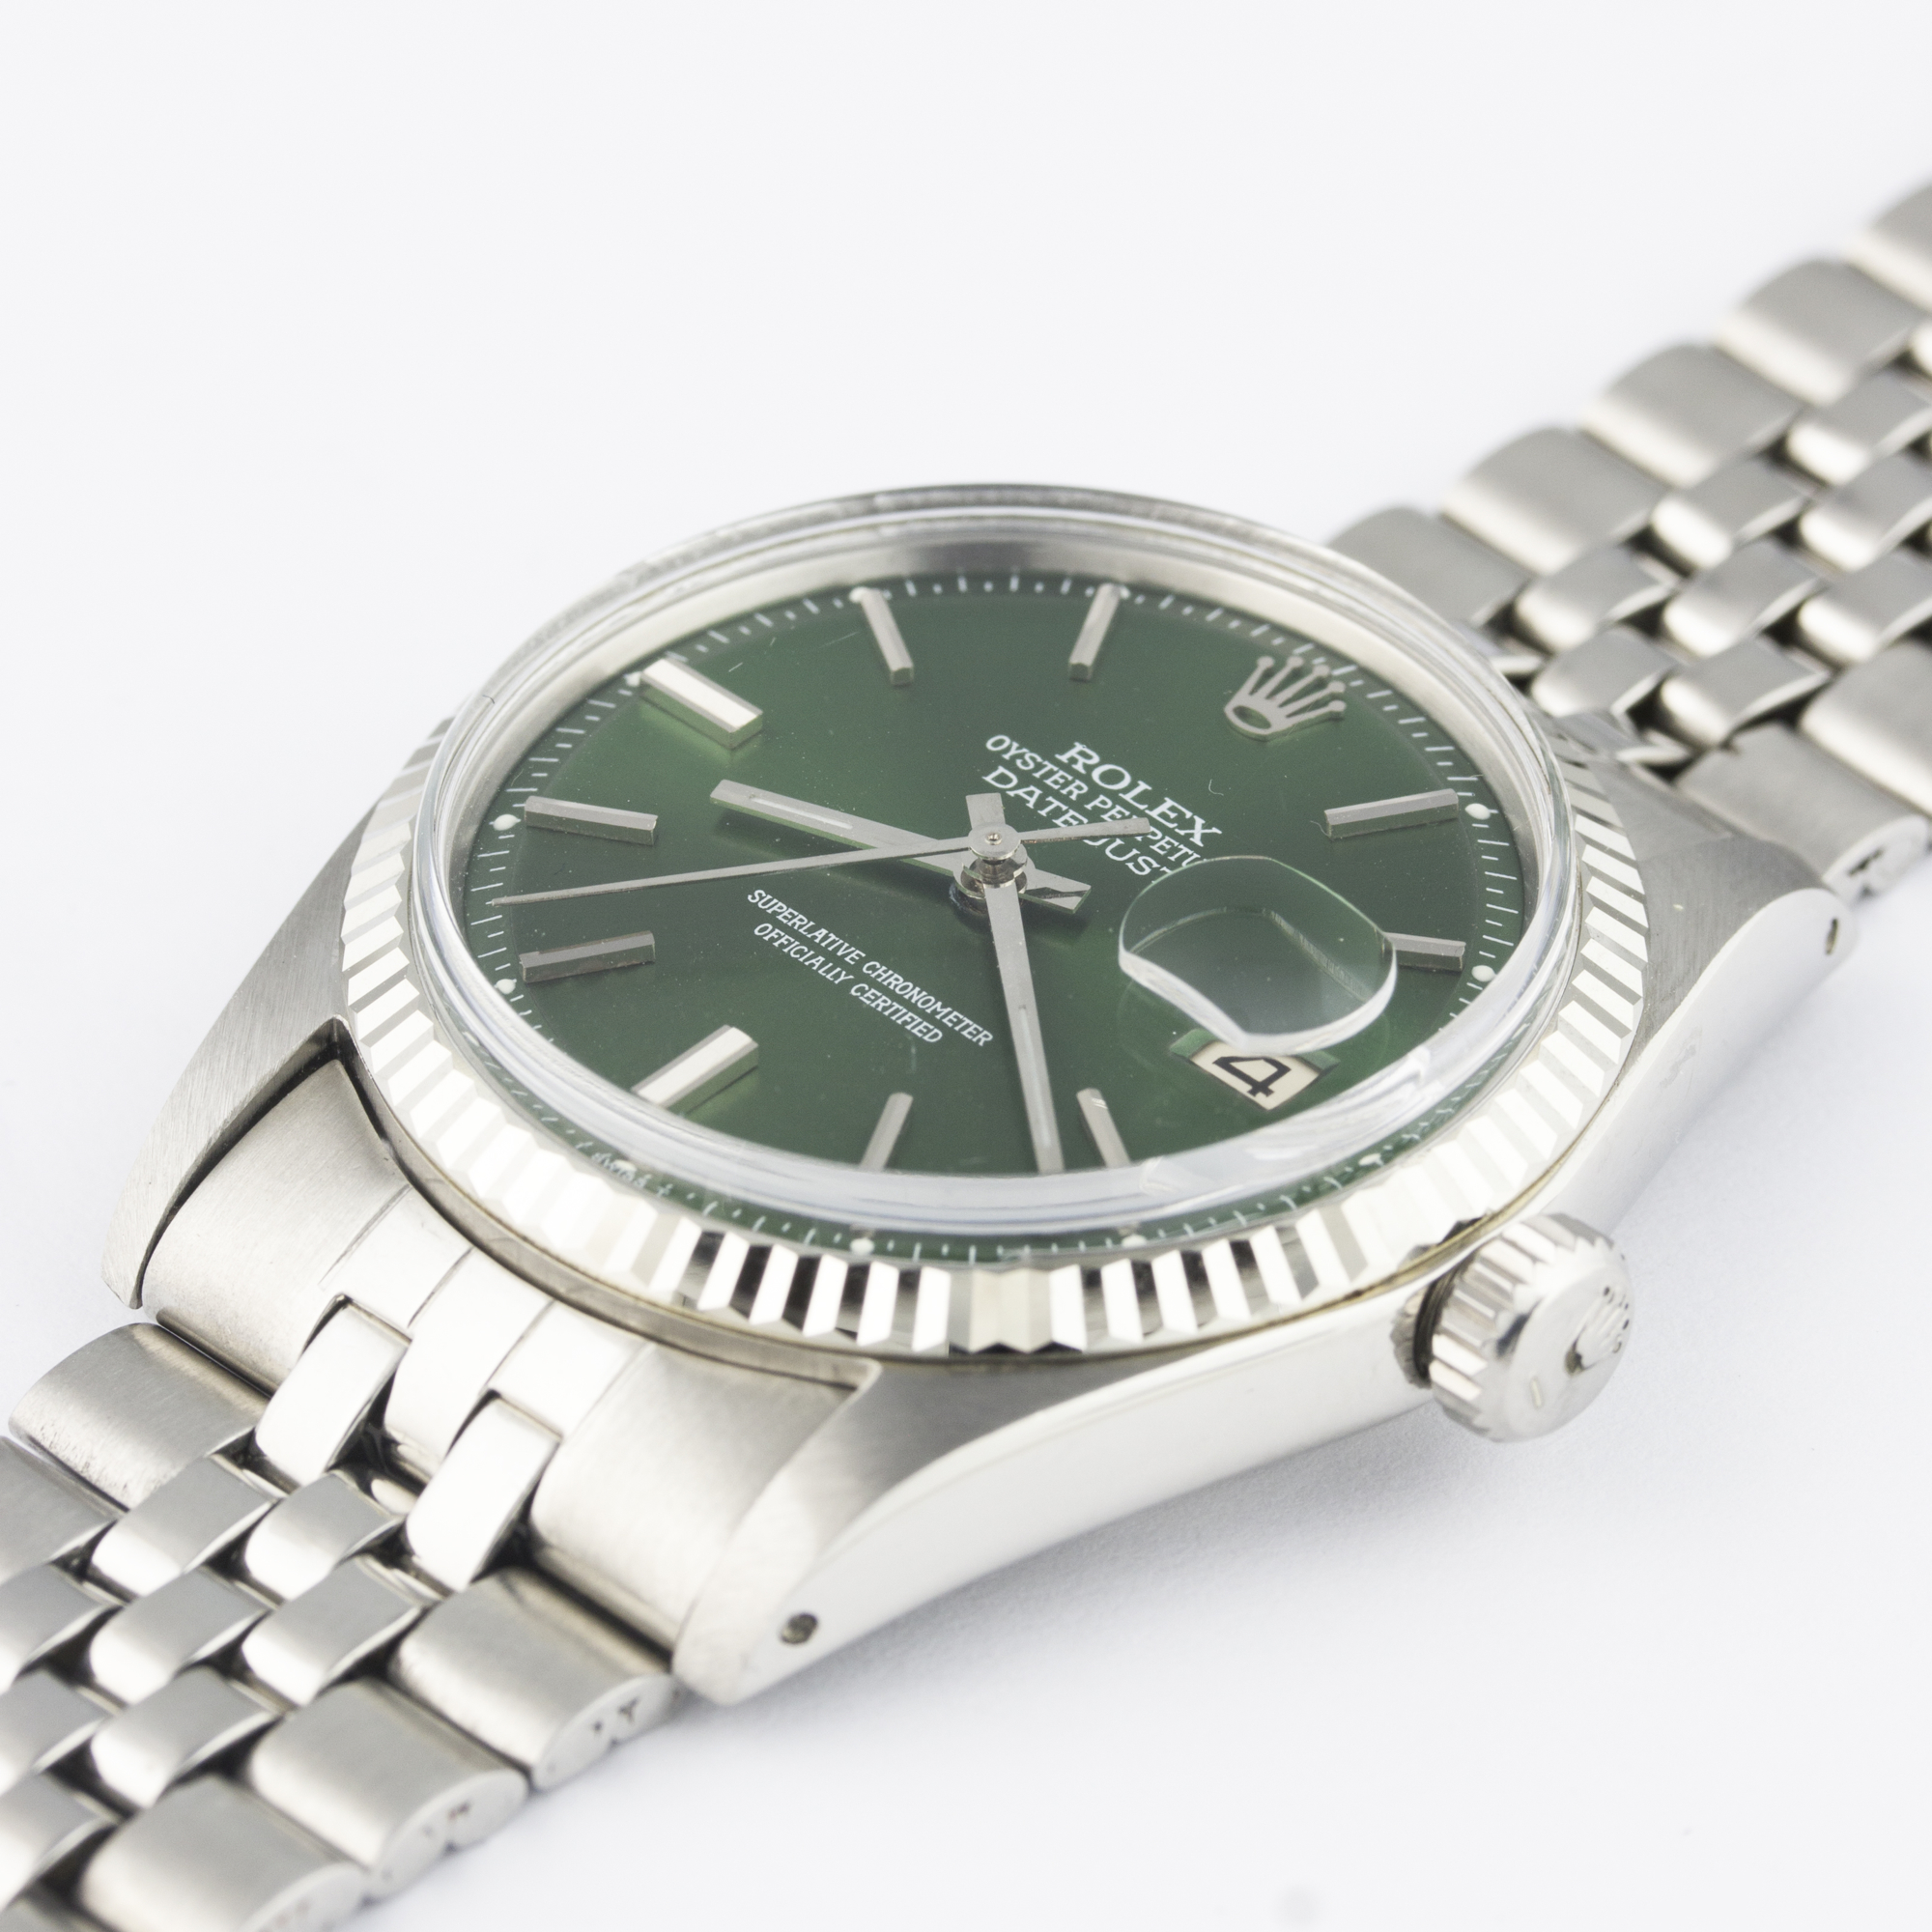 A GENTLEMAN'S STAINLESS STEEL & WHITE GOLD ROLEX OYSTER PERPETUAL DATEJUST BRACELET WATCH CIRCA - Image 3 of 10